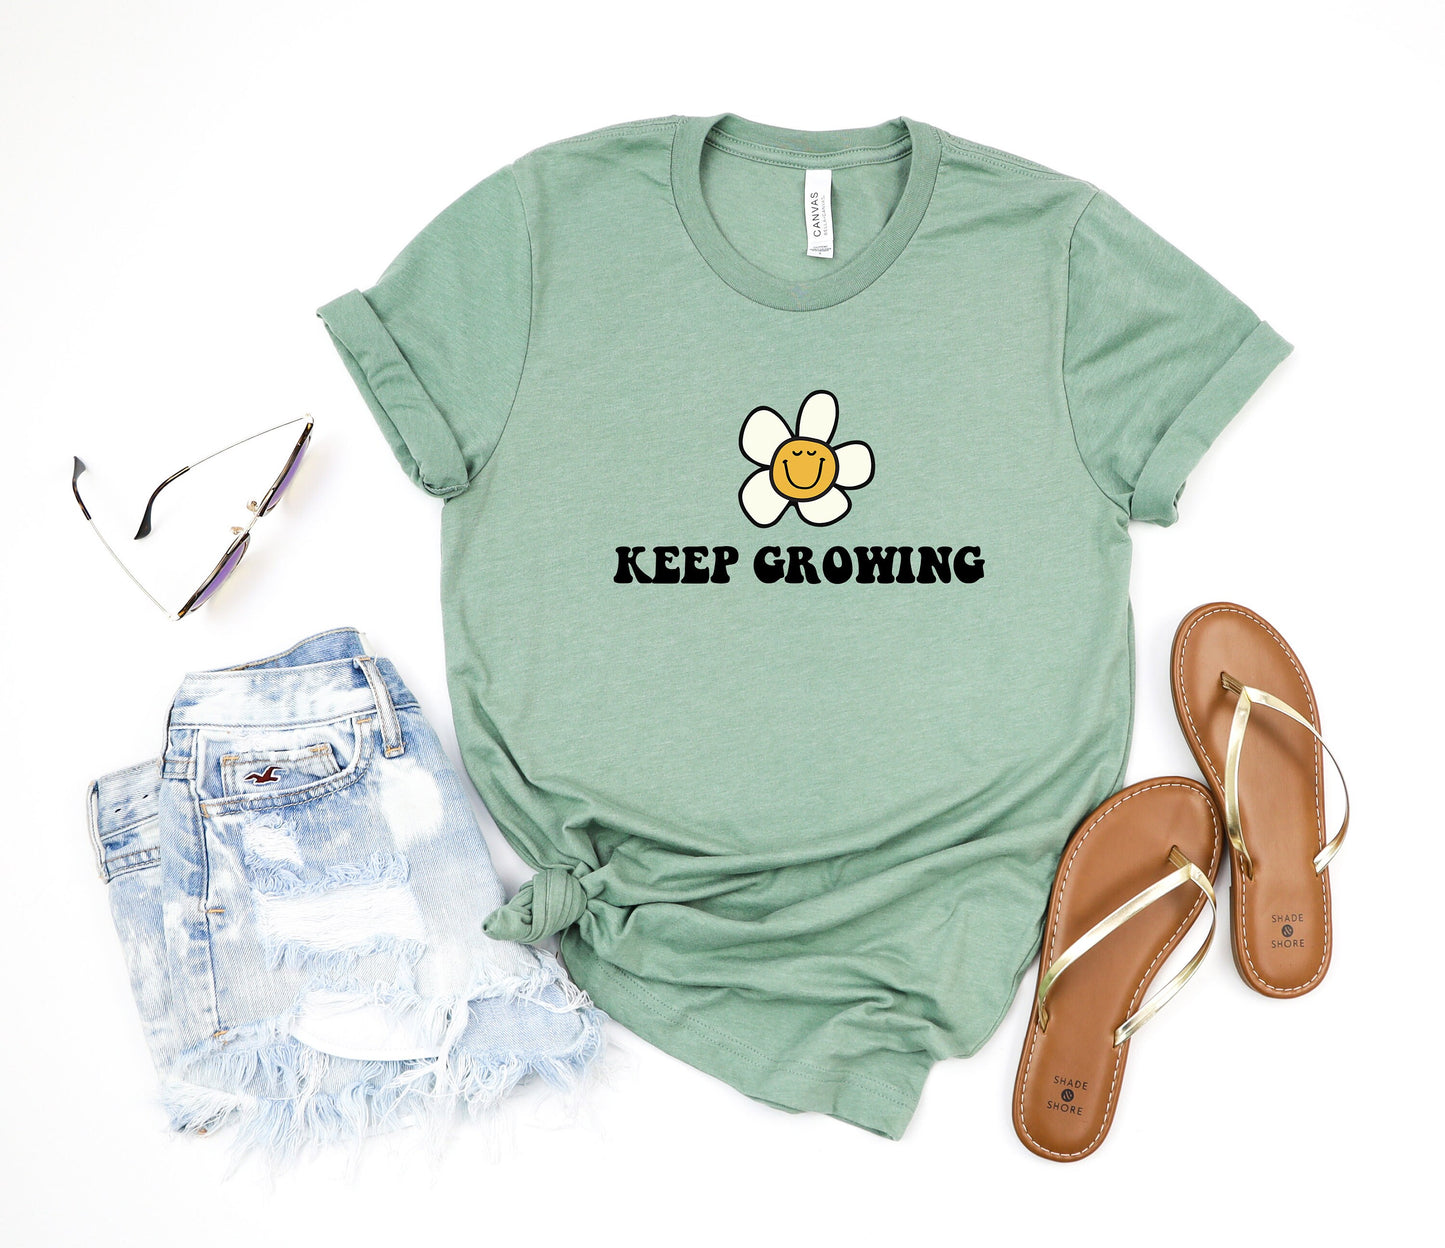 Keep Growing! Cartoon Happy Smiling Shasta Daisy Large White Flower Ultra Soft Graphic Tee Unisex Soft Tee T-shirt for Women or Men